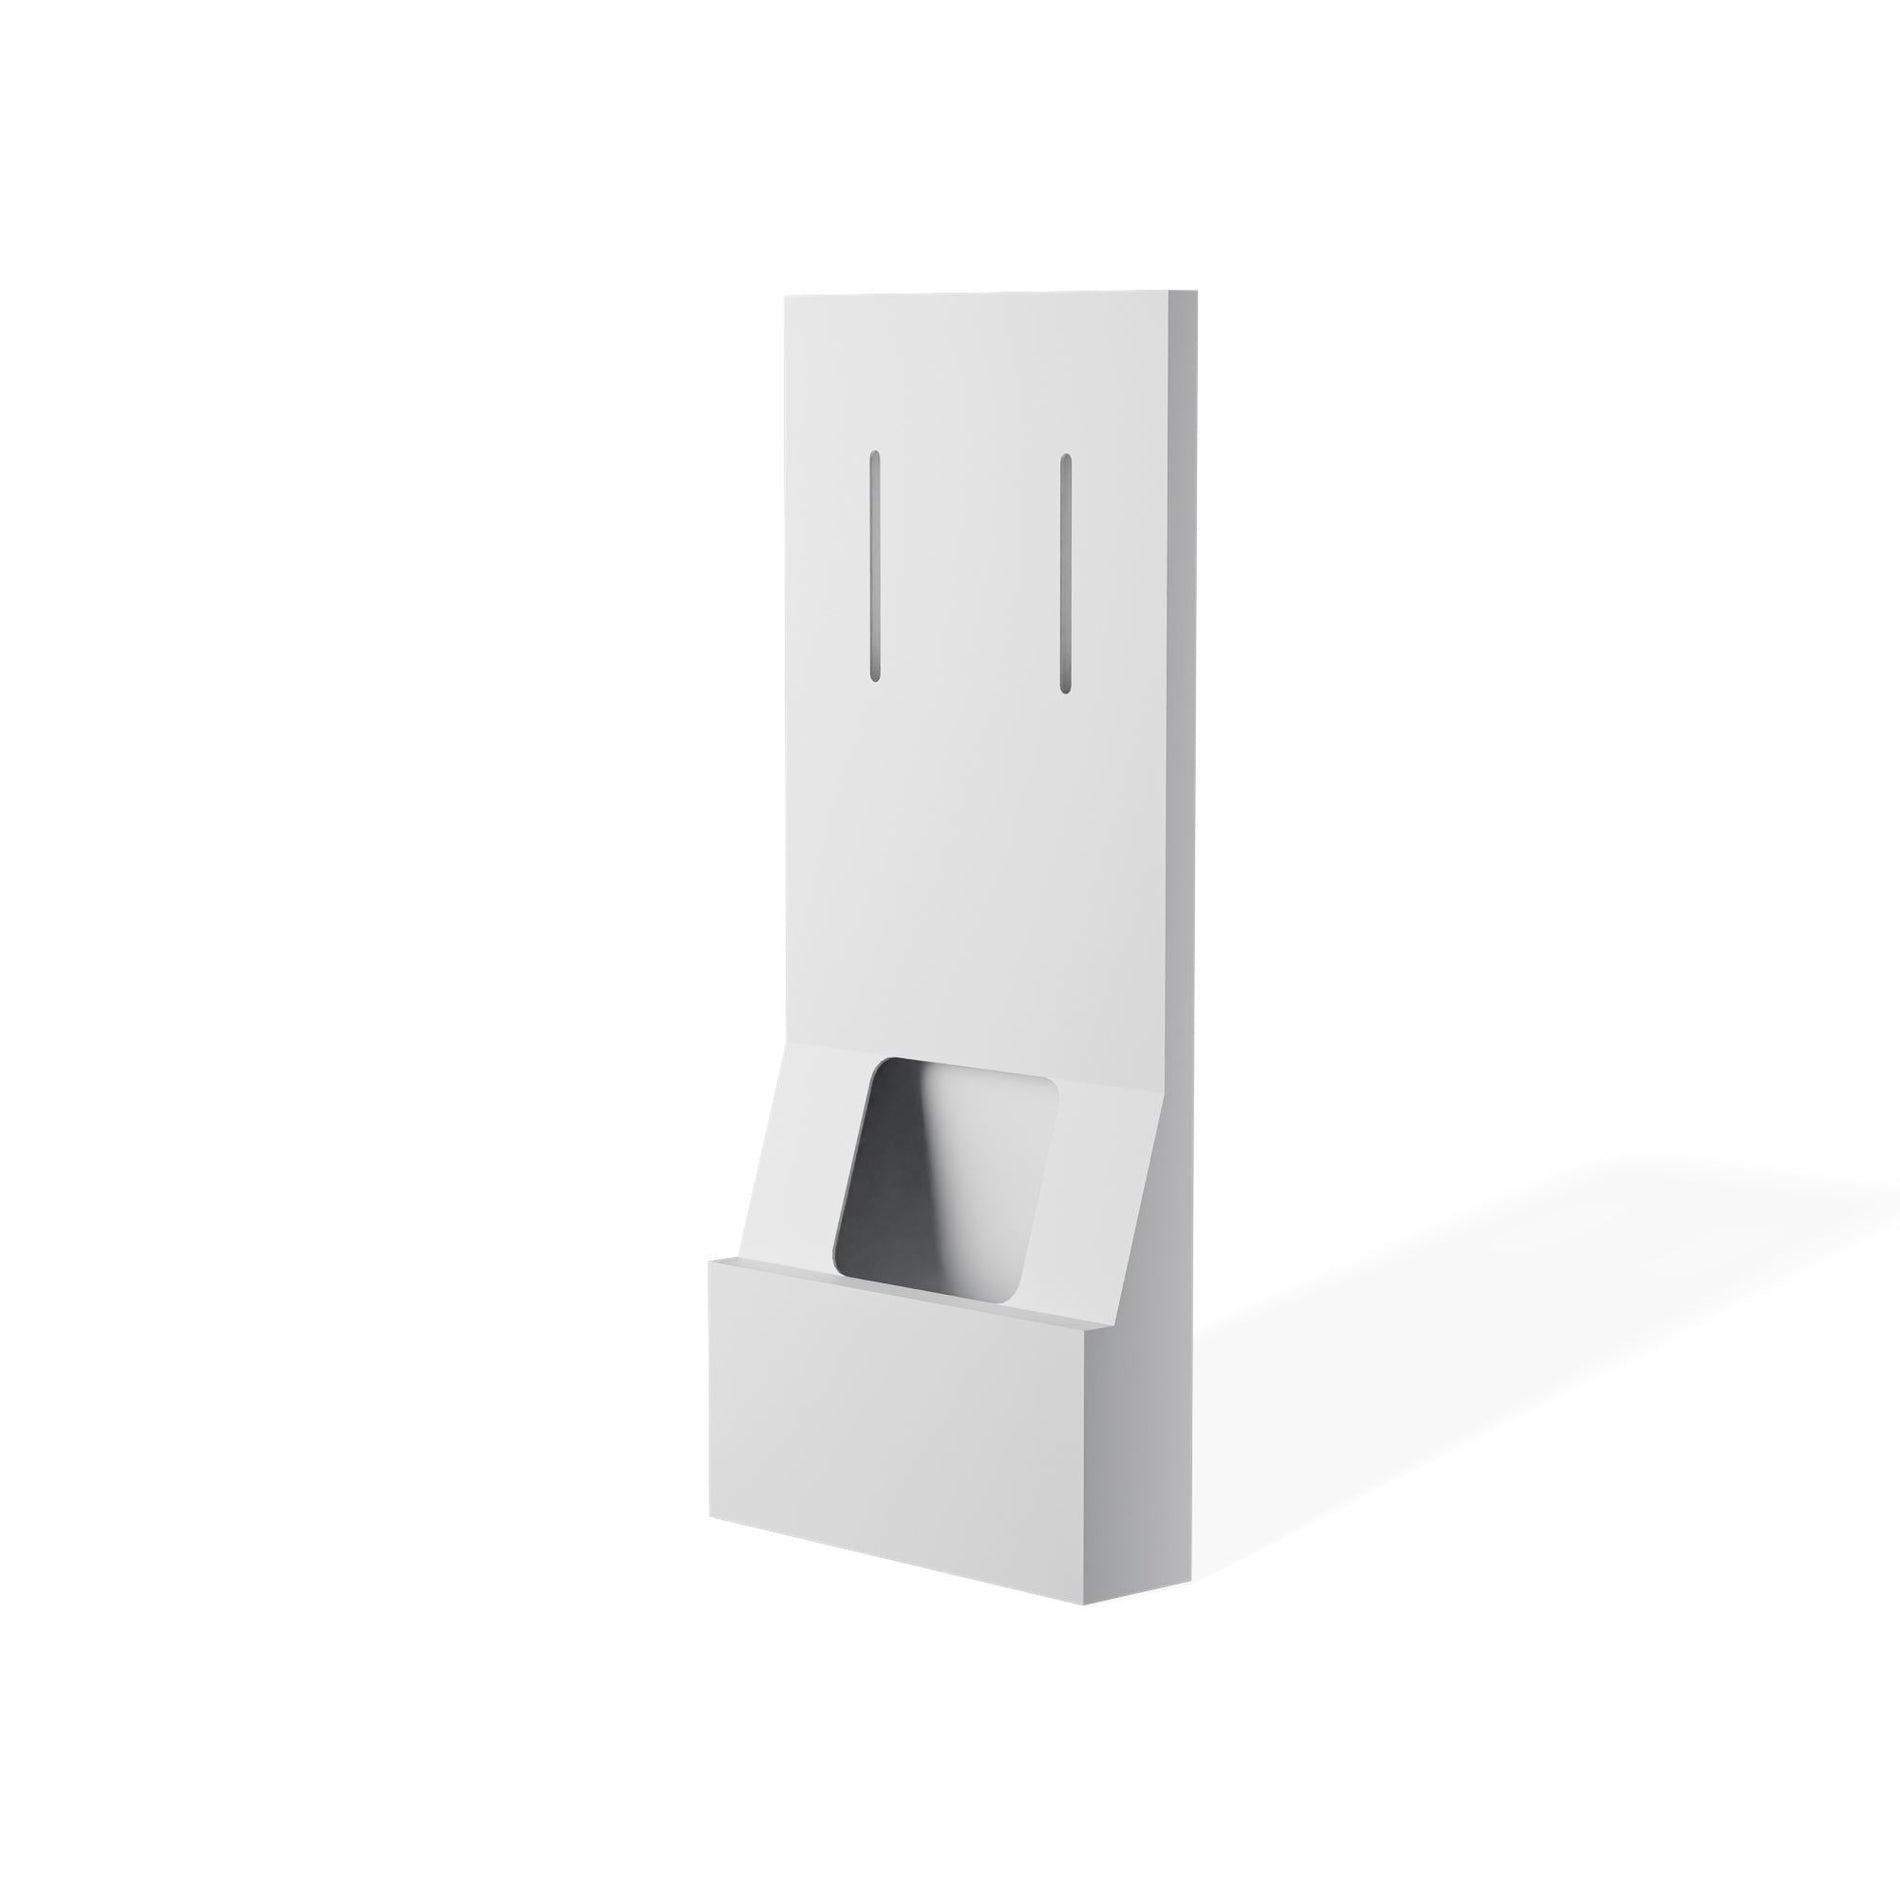 Quell - Furniture of Meeting Pod - 4 PersonMonitor stand